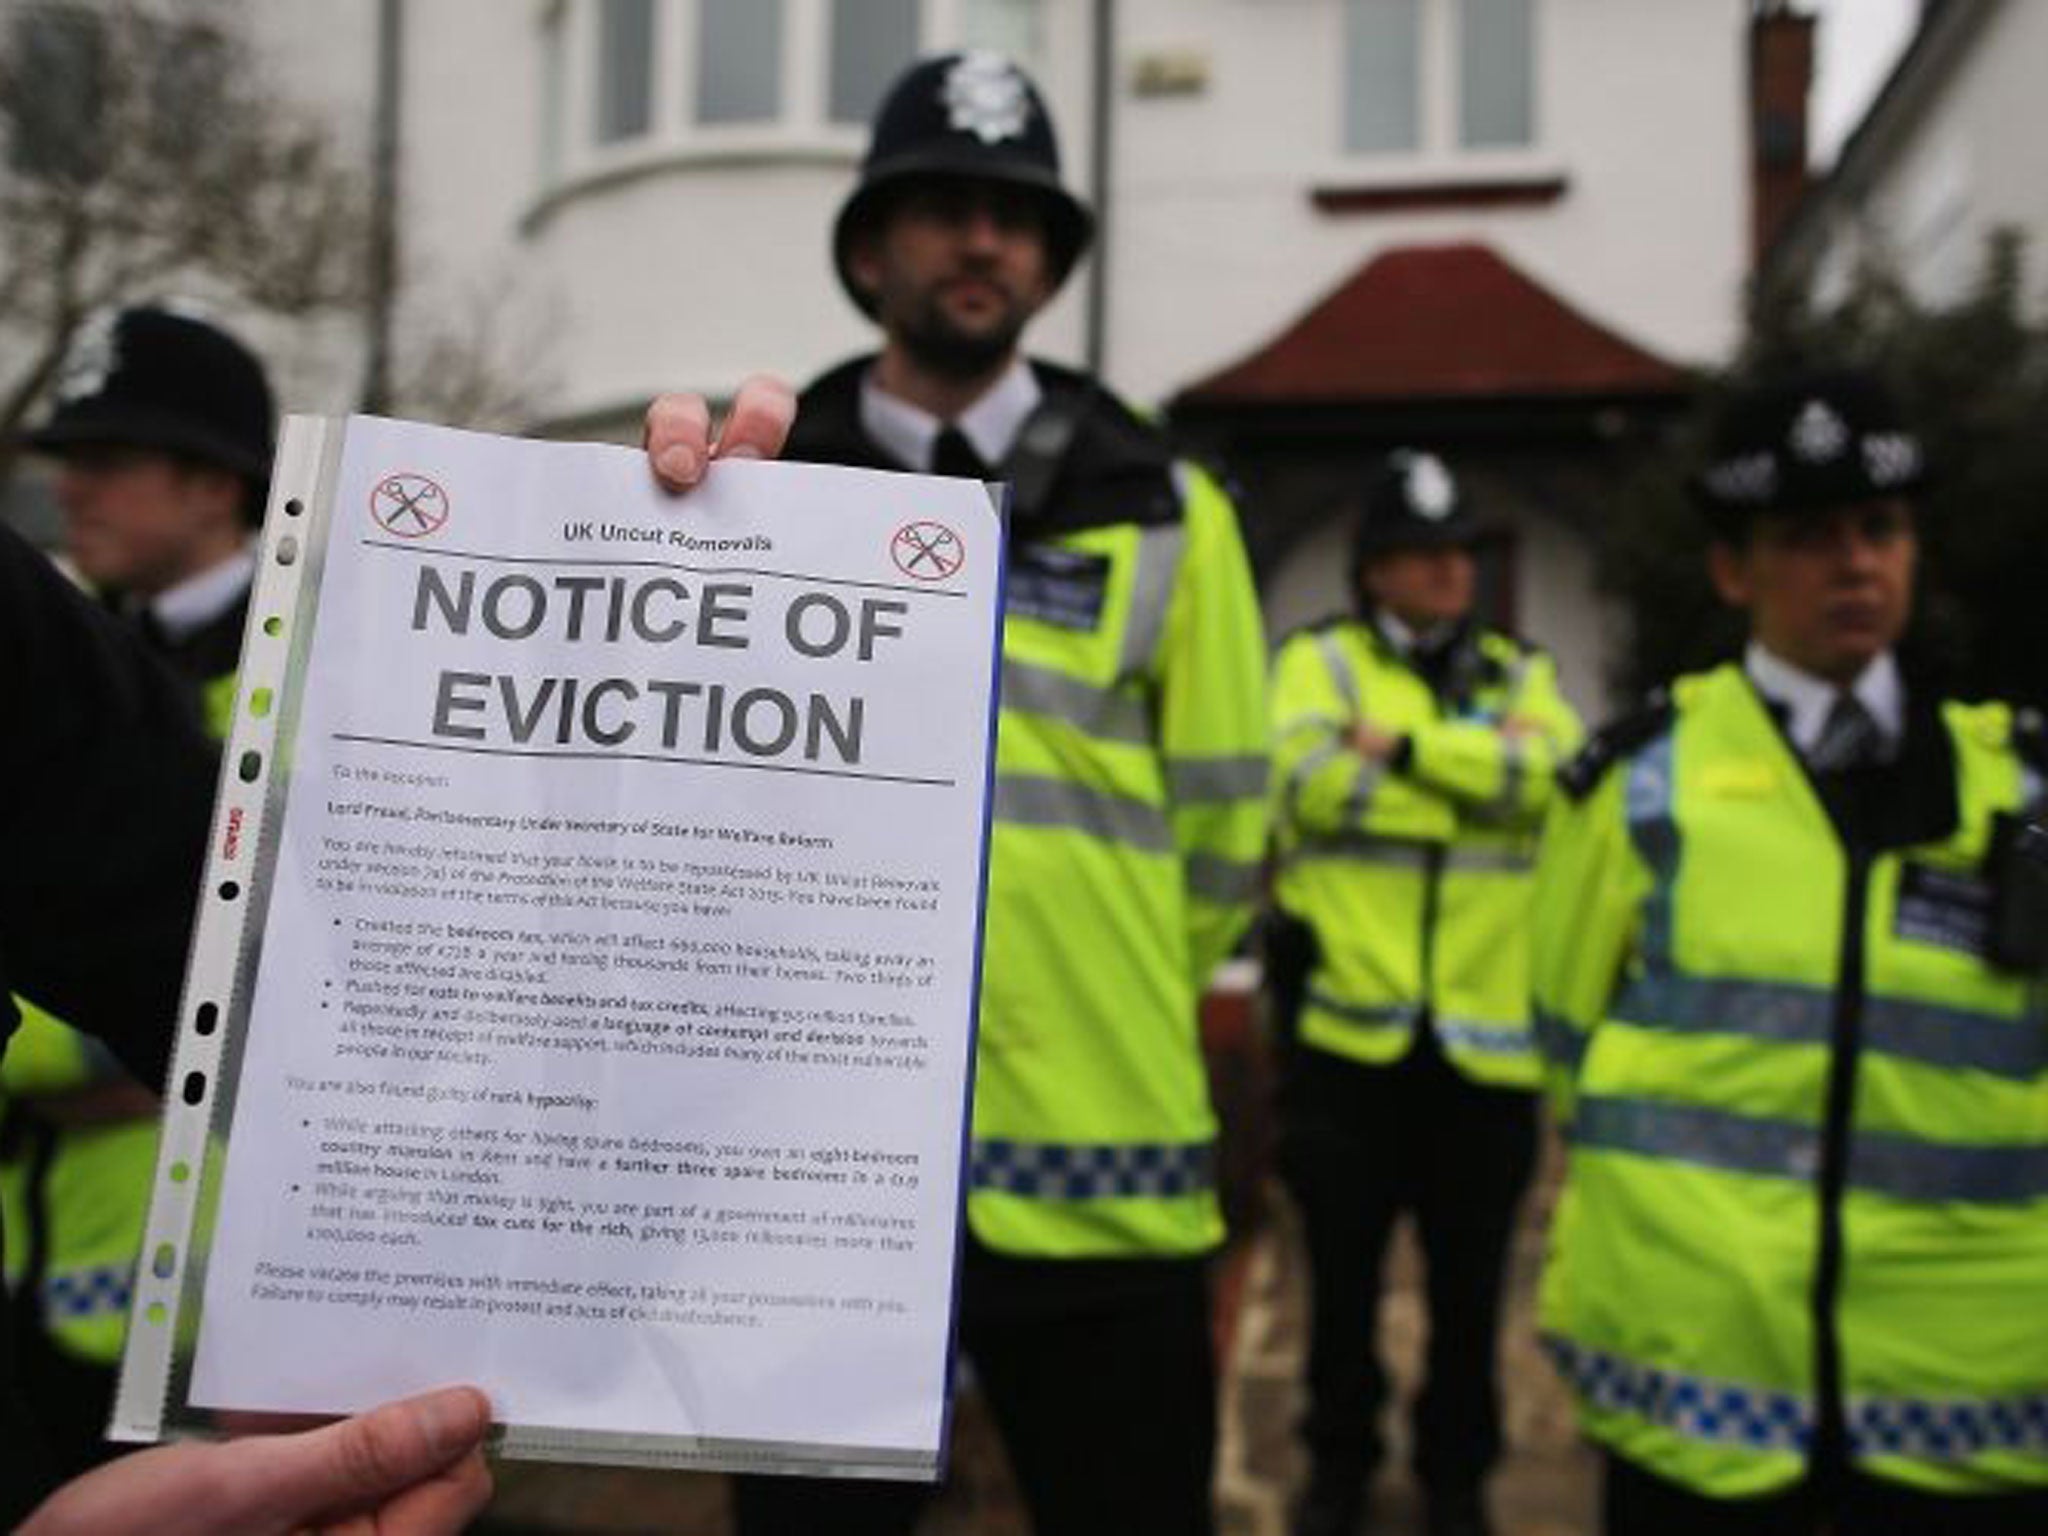 Courts can process eviction cases and issue notices of eviction but bailiffs won’t be able to enact them until after the current extension ends on 22 February